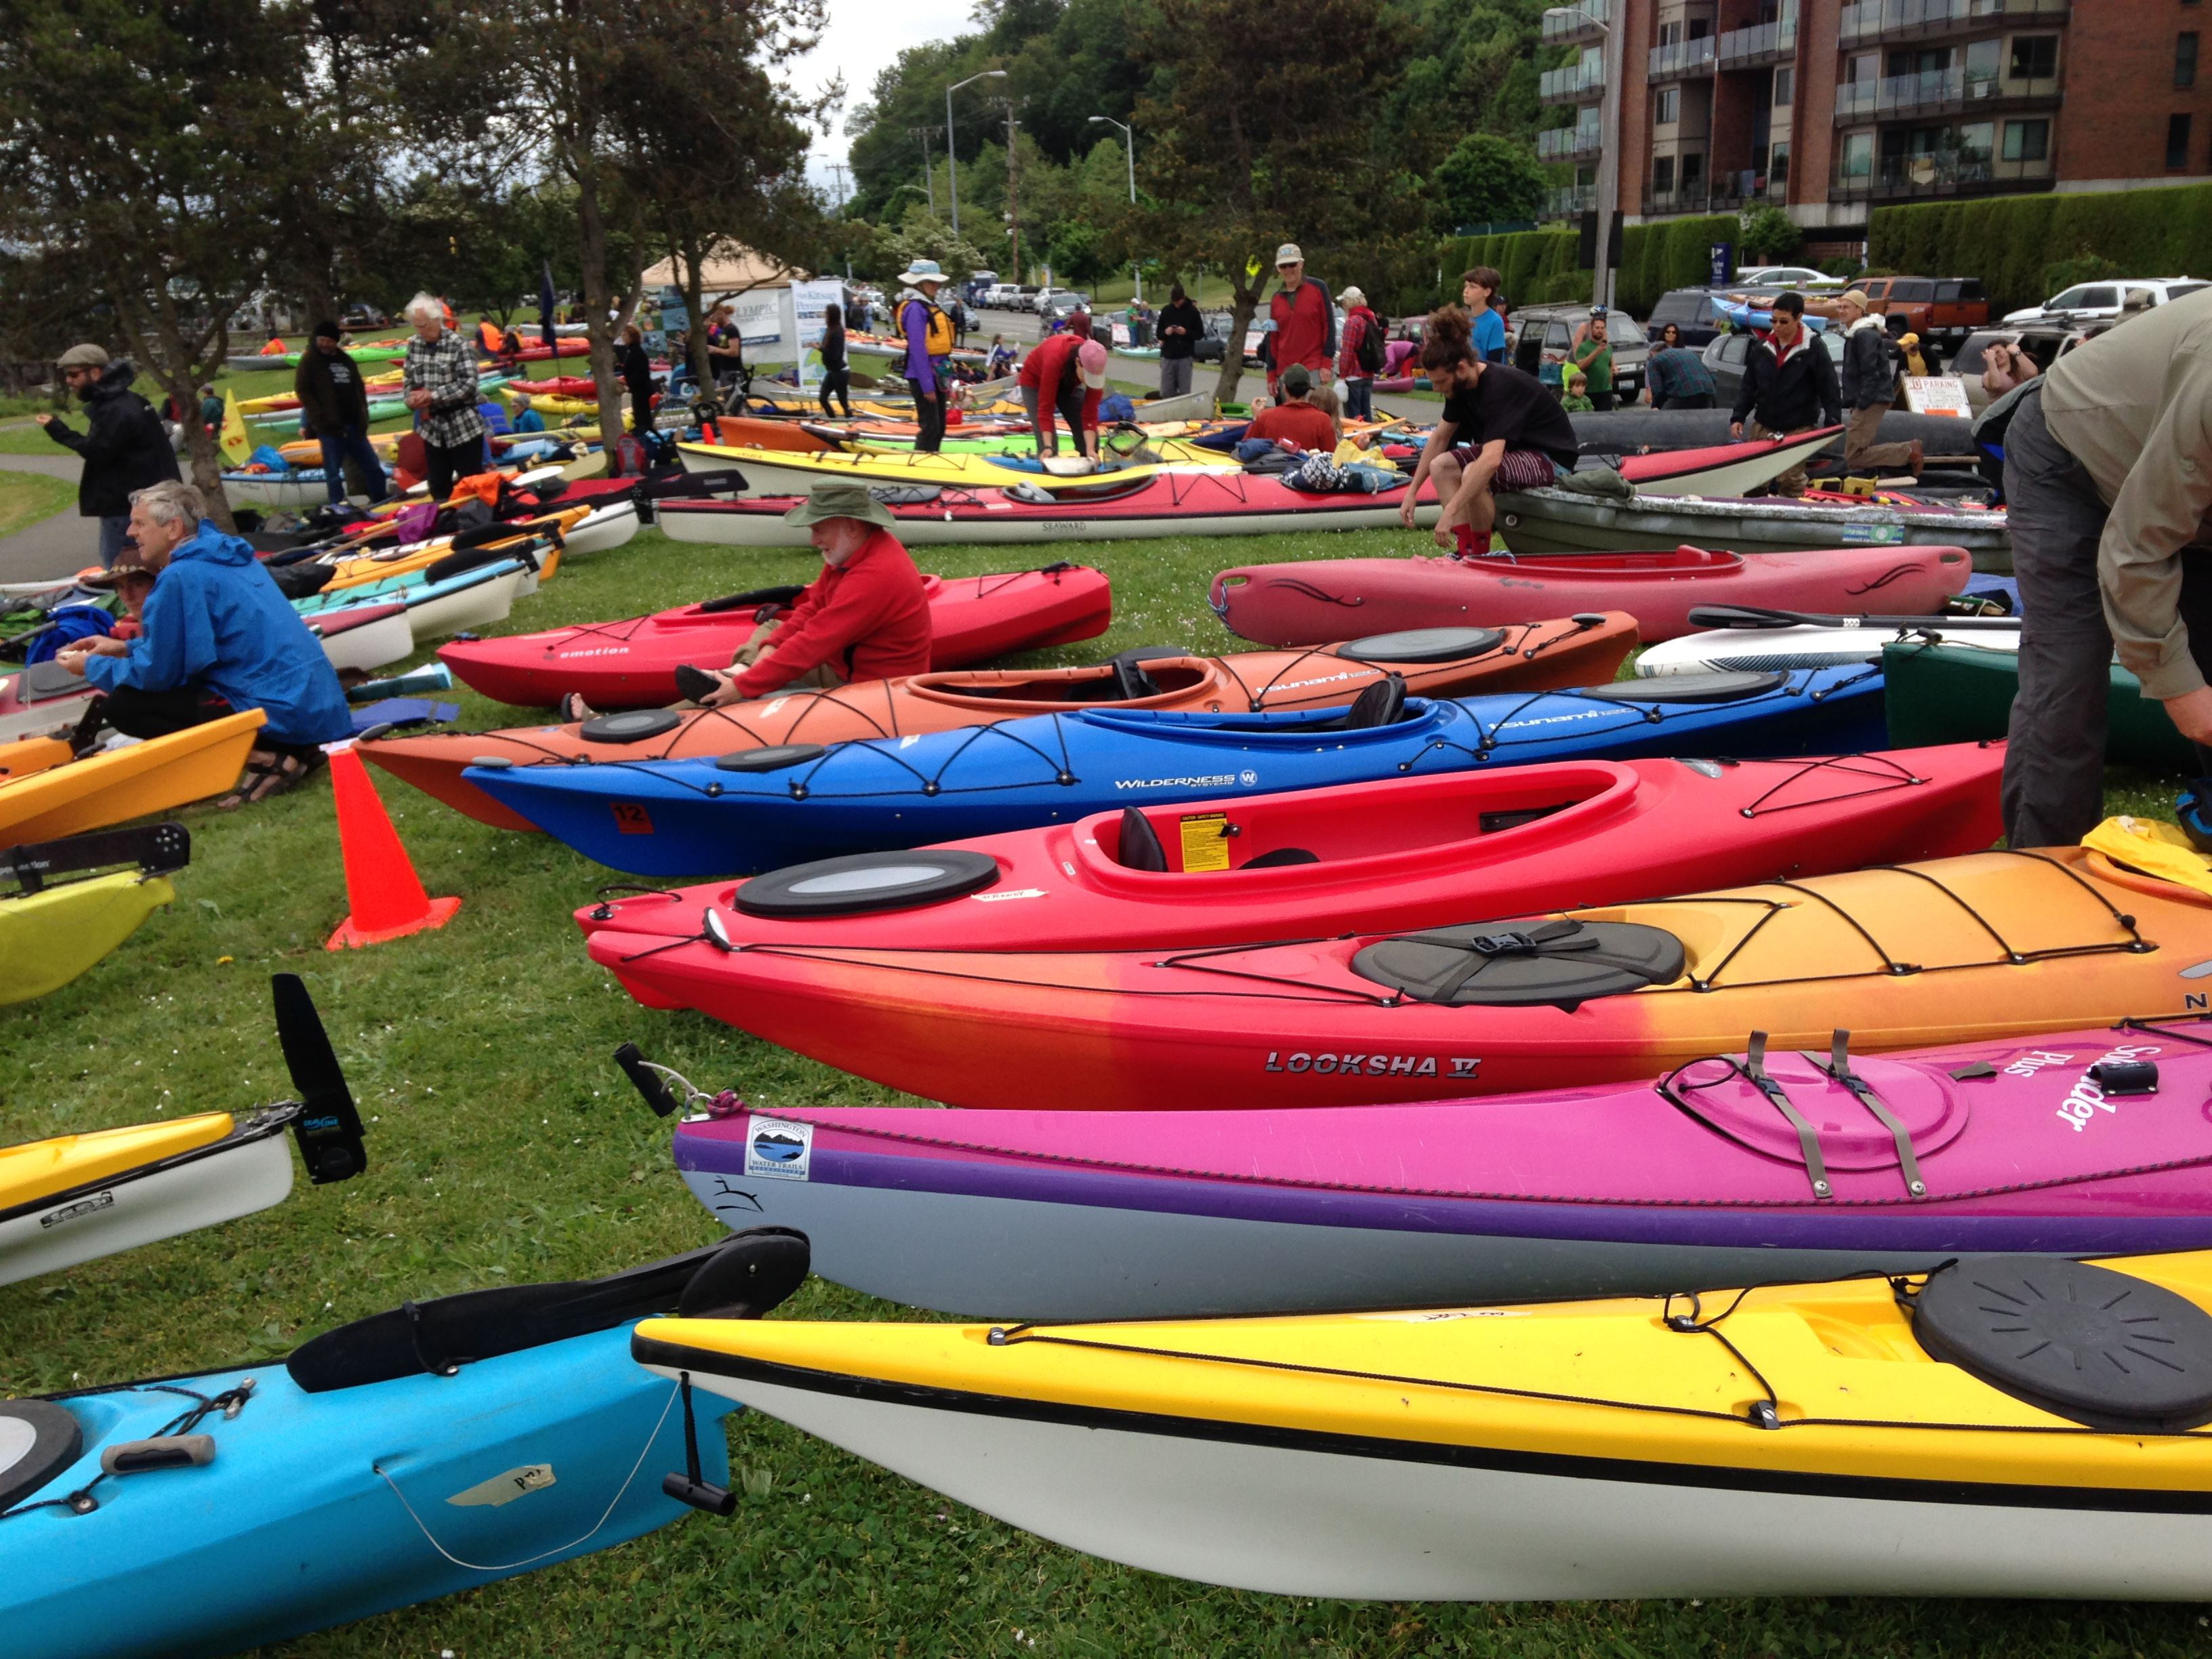 Activists who oppose Royal Dutch Shell's plans to drill for oil in the Arctic Ocean prepare their kayaks for the "Paddle in Seattle" protest on May 16, 2015, in Seattle. (Martha Bellisle—AP)